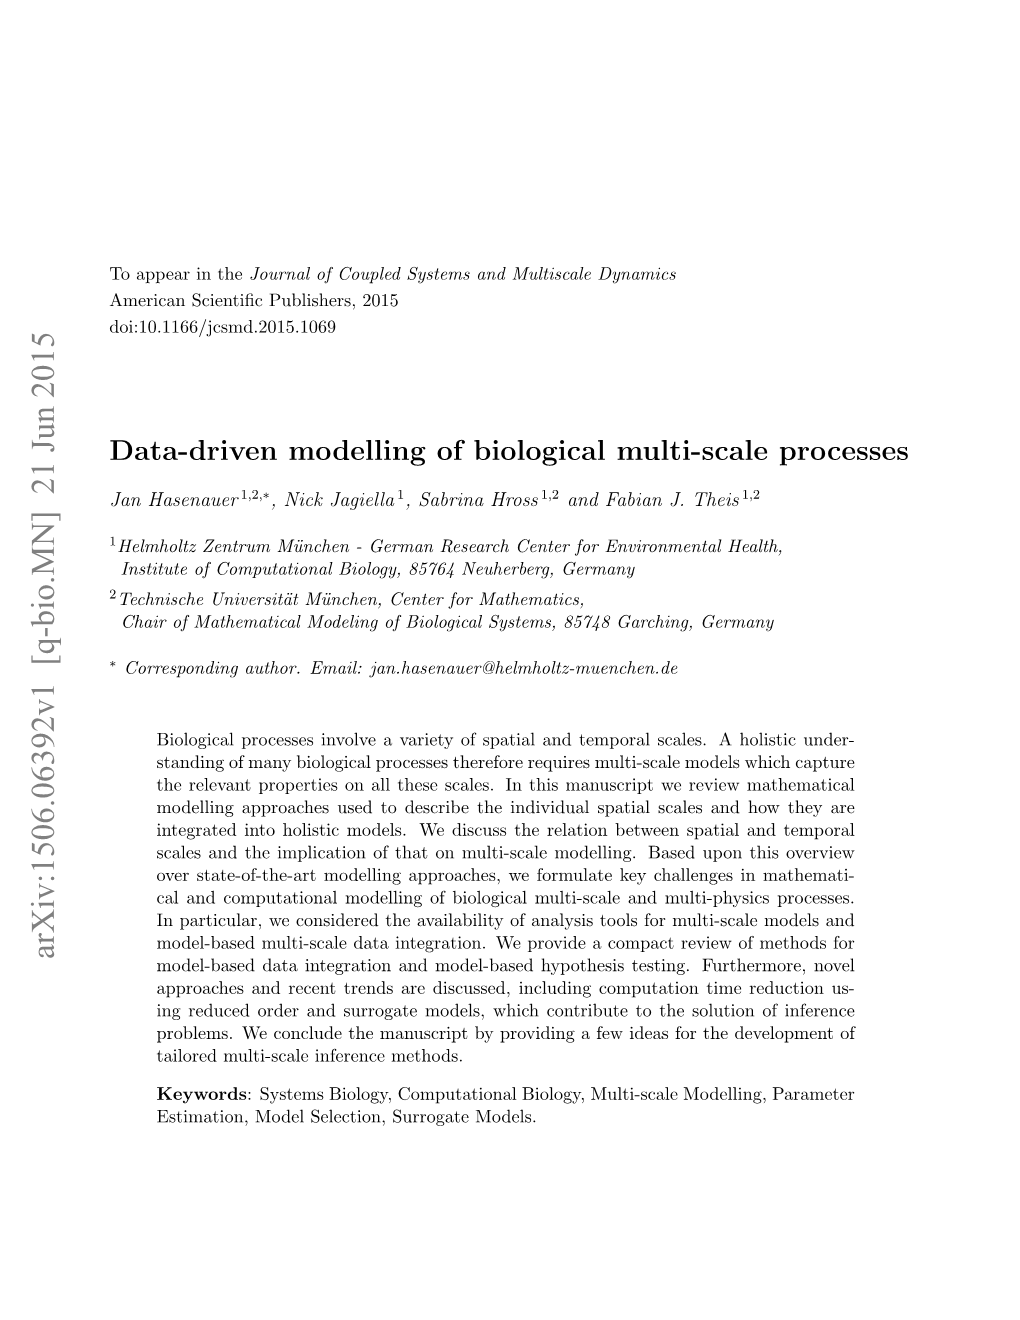 Data-Driven Modelling of Biological Multi-Scale Processes